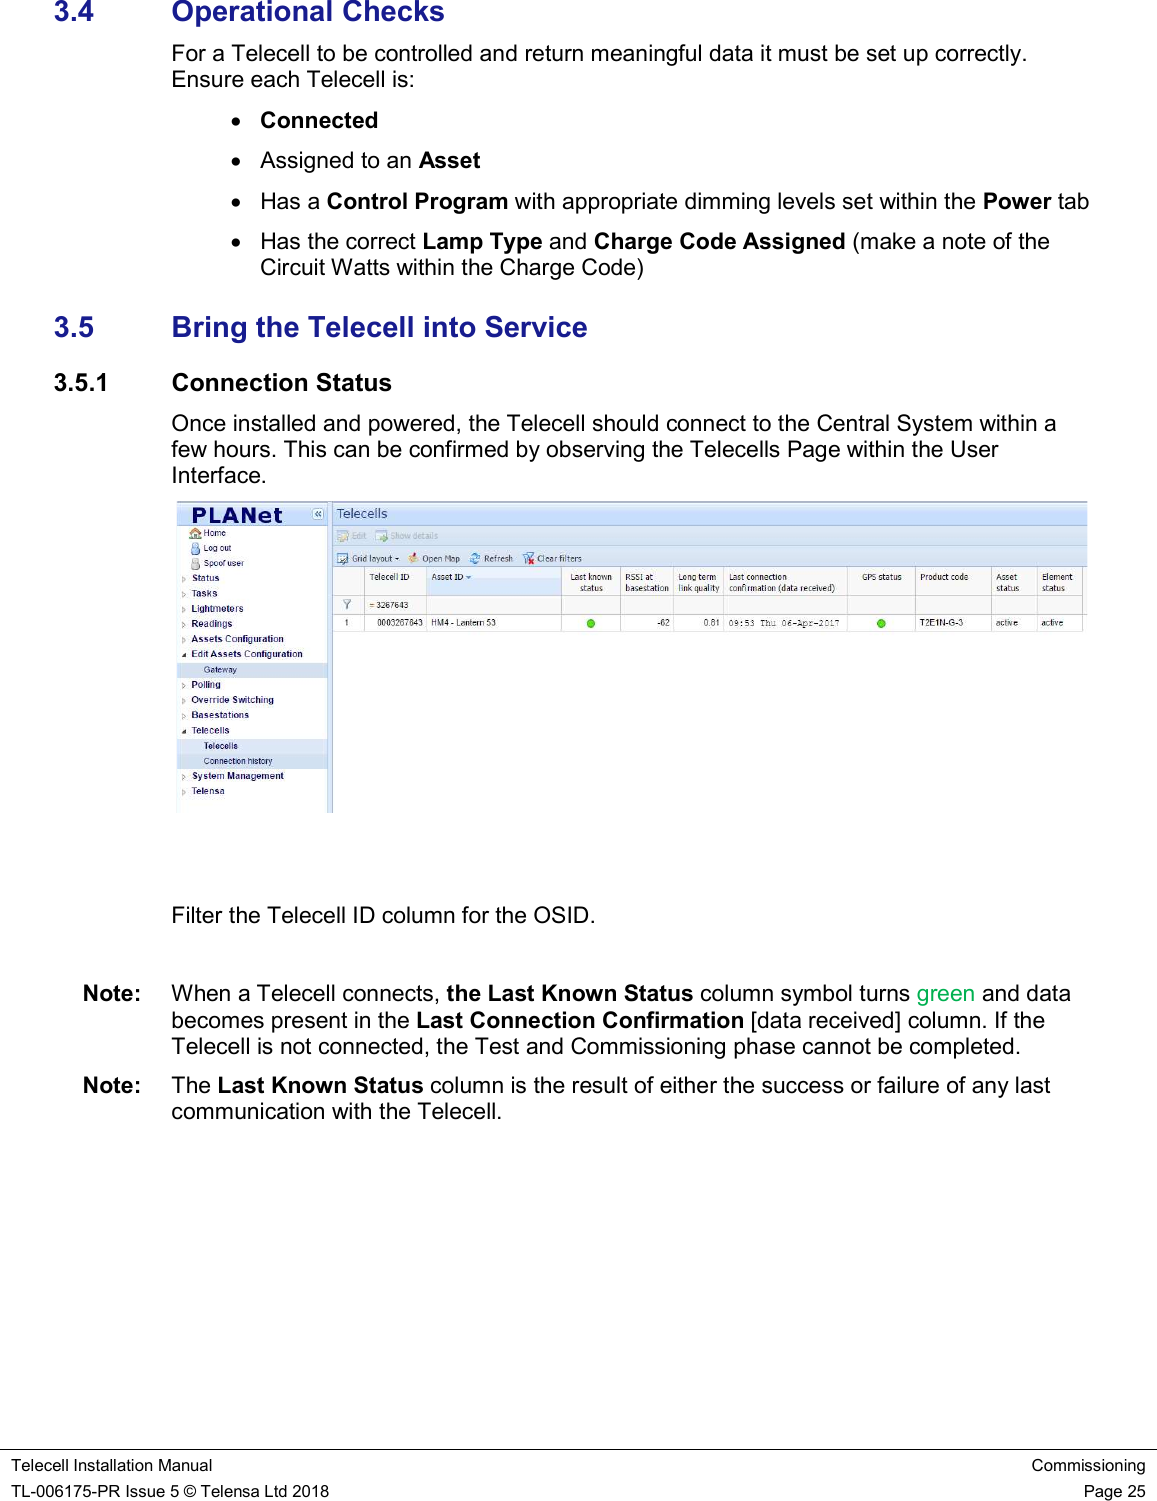    Telecell Installation Manual Commissioning TL-006175-PR Issue 5 © Telensa Ltd 2018    Page 25  3.4  Operational Checks For a Telecell to be controlled and return meaningful data it must be set up correctly. Ensure each Telecell is:  Connected   Assigned to an Asset   Has a Control Program with appropriate dimming levels set within the Power tab   Has the correct Lamp Type and Charge Code Assigned (make a note of the Circuit Watts within the Charge Code) 3.5  Bring the Telecell into Service 3.5.1  Connection Status Once installed and powered, the Telecell should connect to the Central System within a few hours. This can be confirmed by observing the Telecells Page within the User Interface.    Filter the Telecell ID column for the OSID.  Note:  When a Telecell connects, the Last Known Status column symbol turns green and data becomes present in the Last Connection Confirmation [data received] column. If the Telecell is not connected, the Test and Commissioning phase cannot be completed. Note:  The Last Known Status column is the result of either the success or failure of any last communication with the Telecell.   